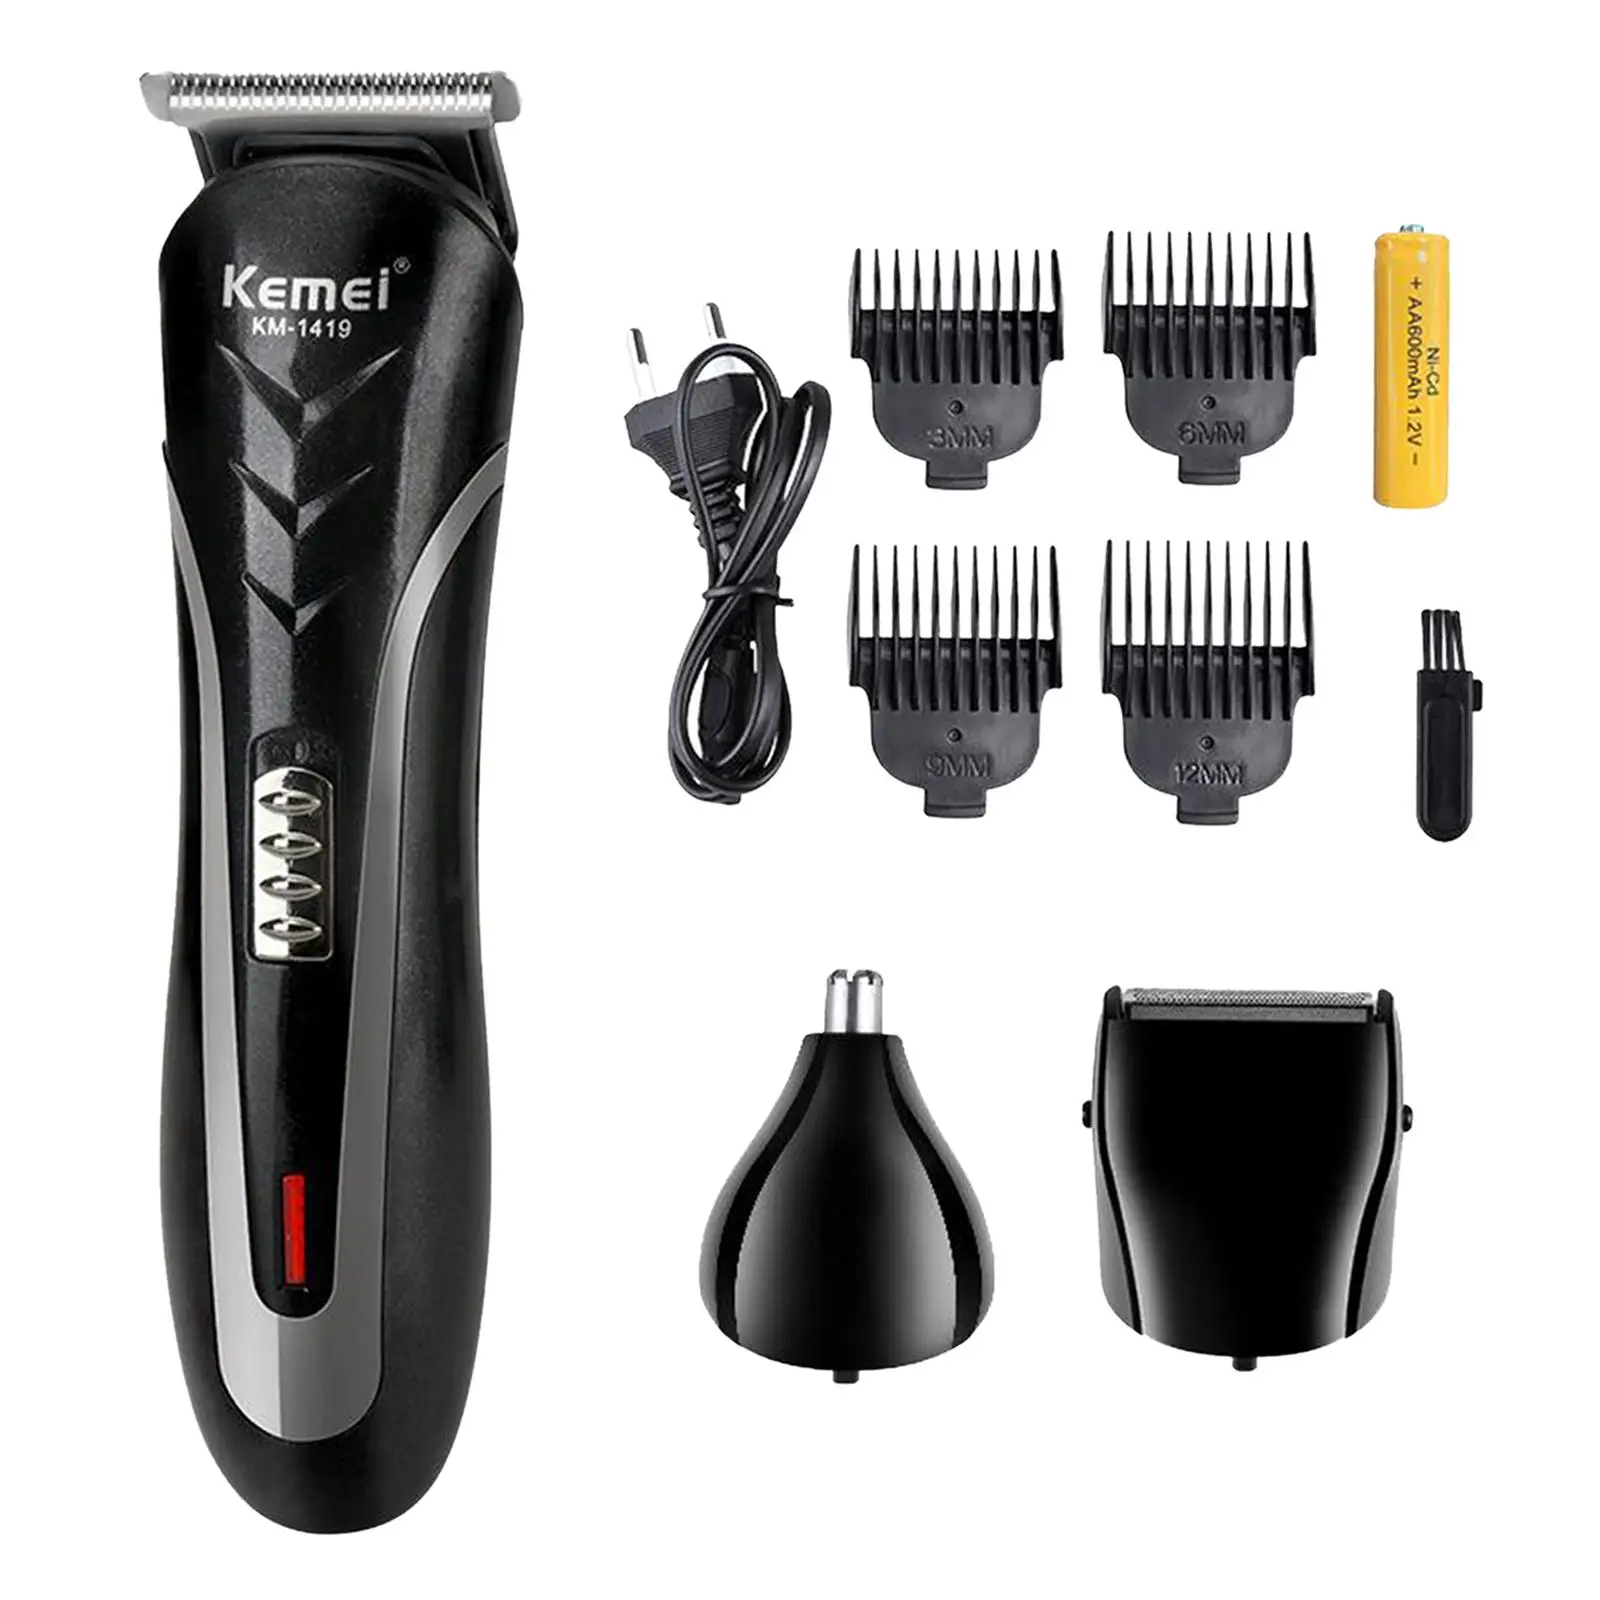 Professional Hair Clippers Barber Haircut Sculpture Cutter Rechargeable Razor Trimmer Adjustable Cordless Edge for Men Kids